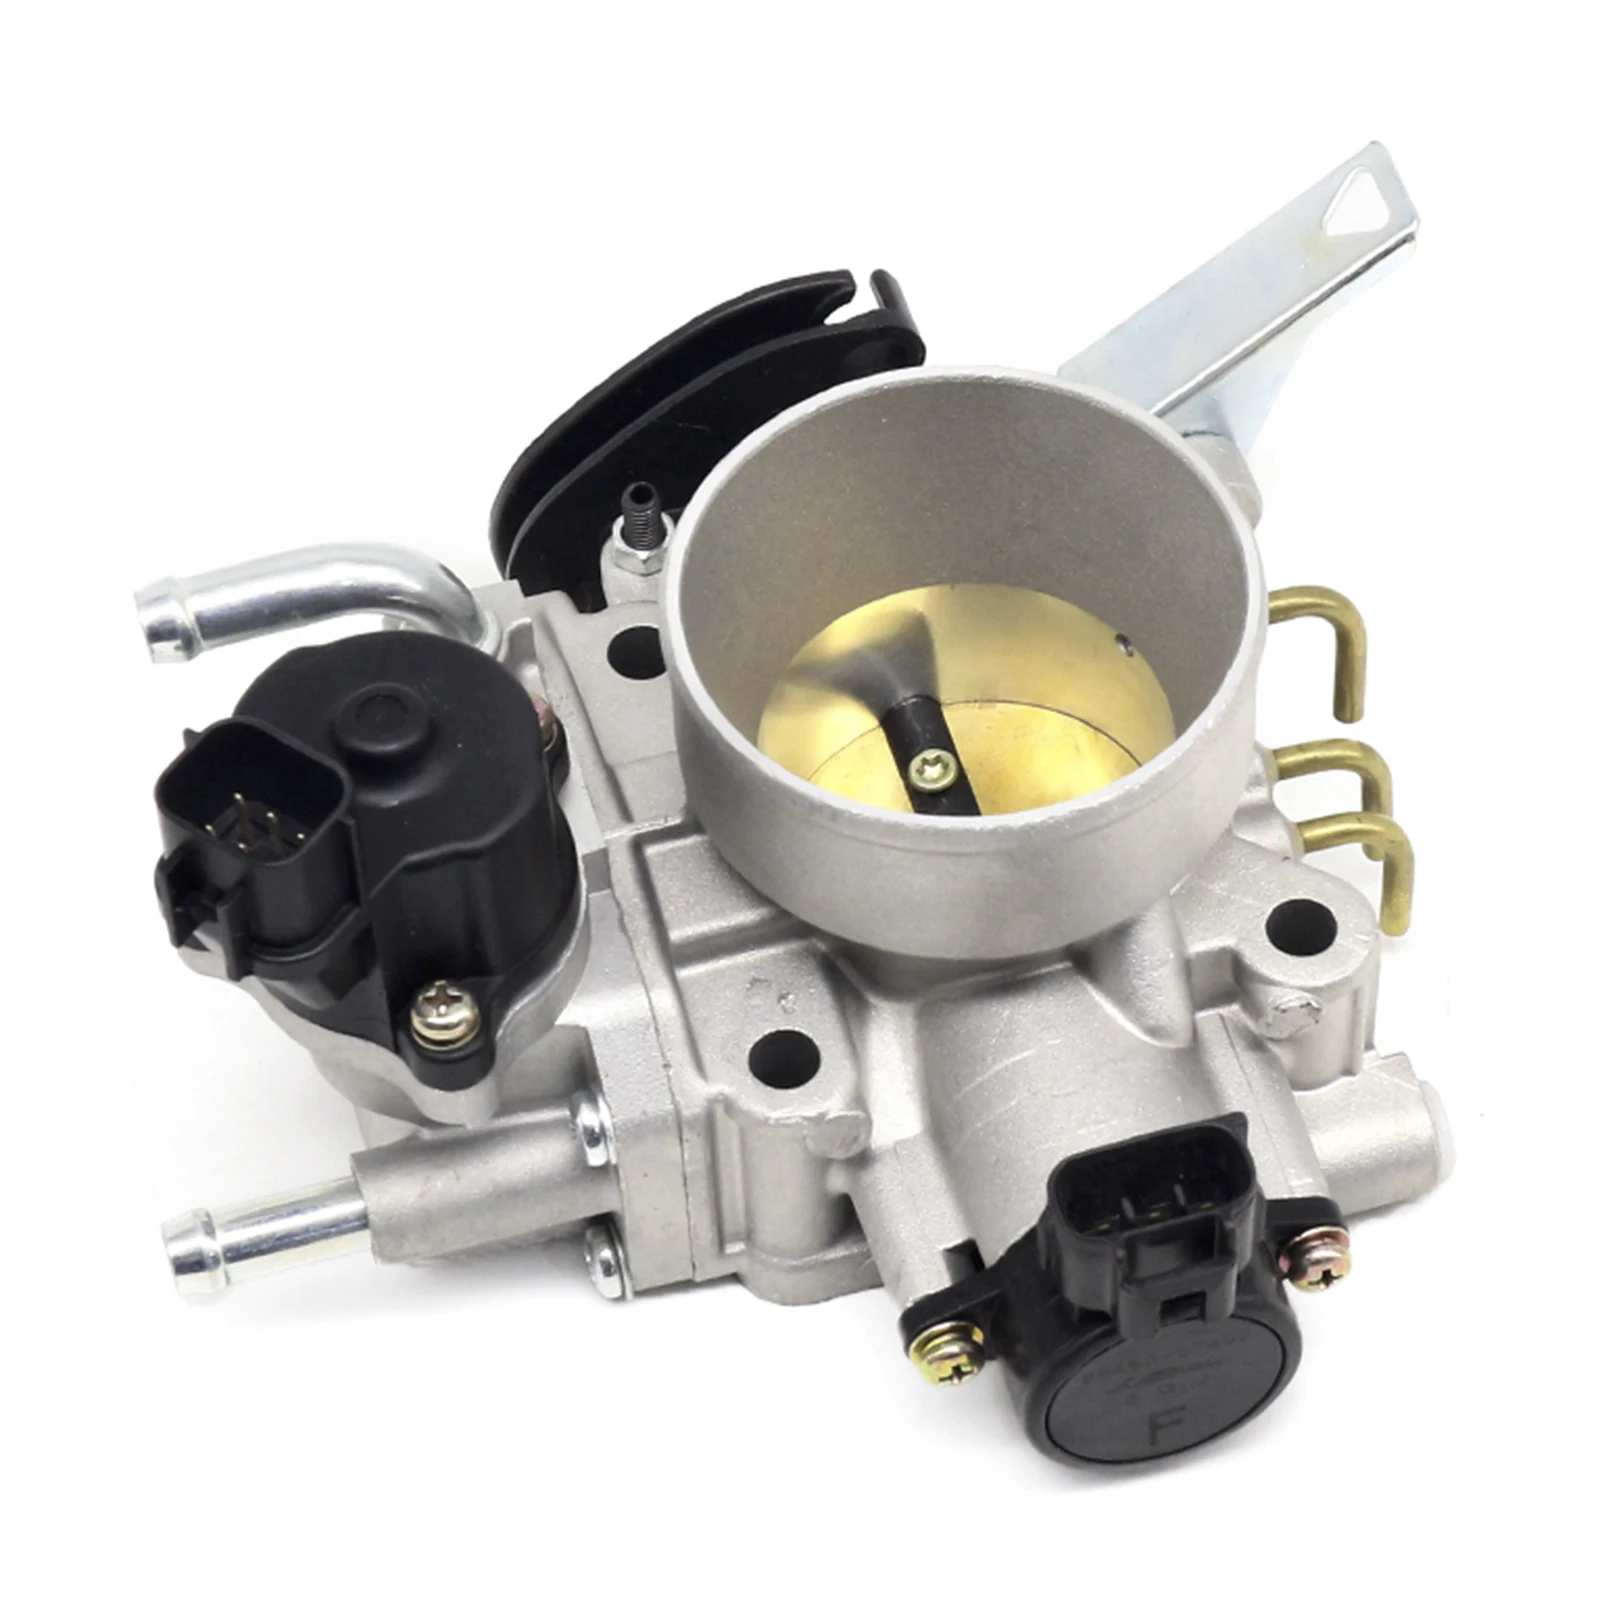 MR560120 MN128888 Throttle Body Assembly Replace Fit for  Lancer 4G18